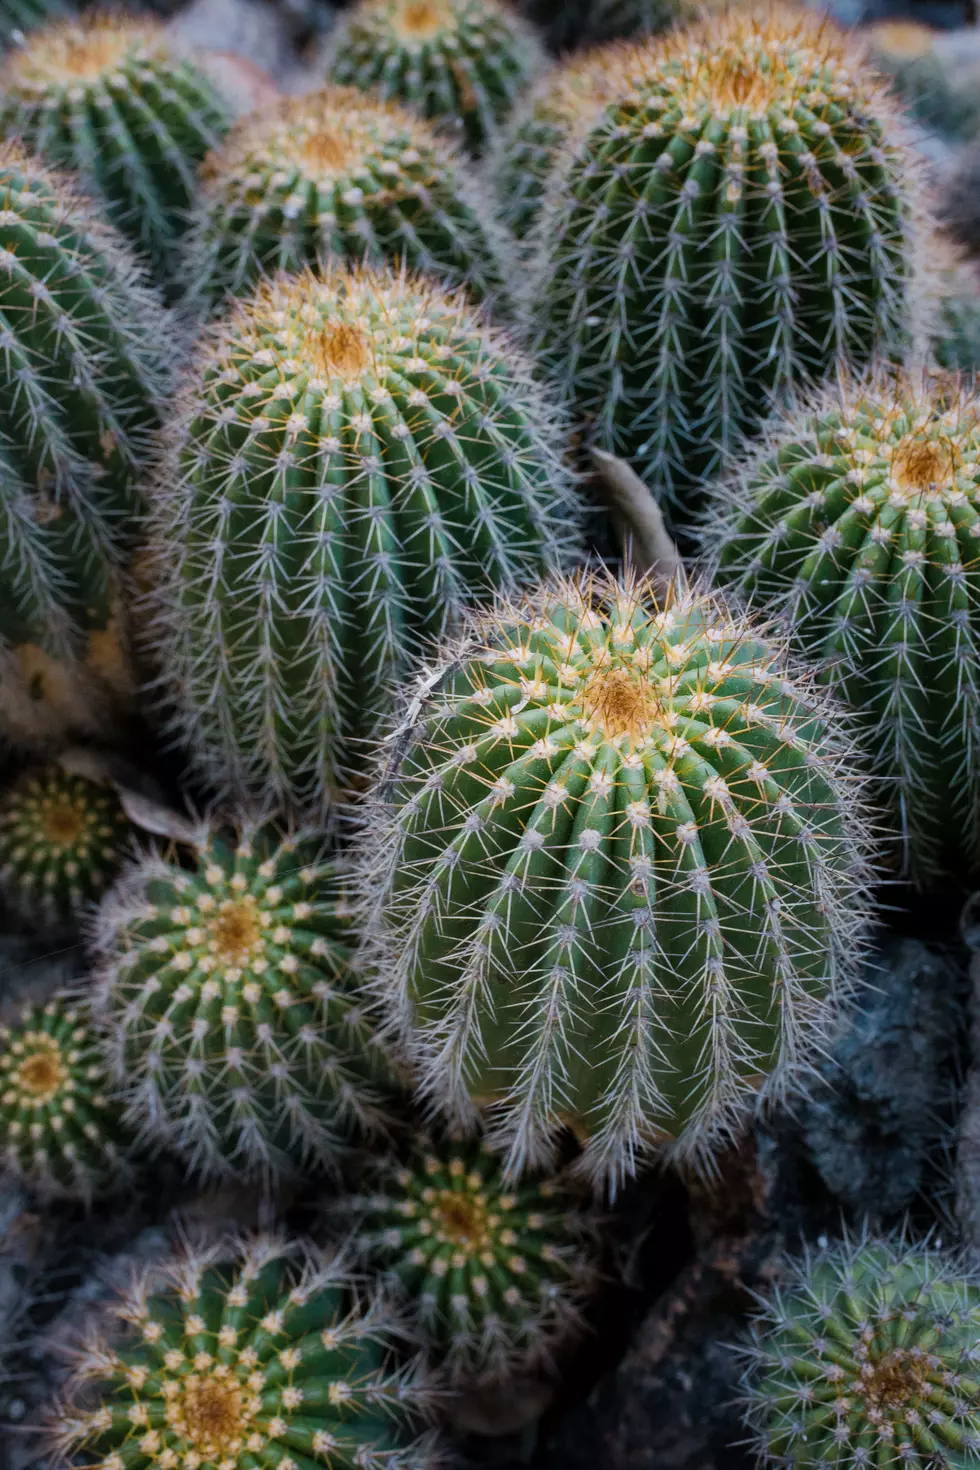 Show Your School Spirit and Buy a Cactus at Texas Tech on Friday